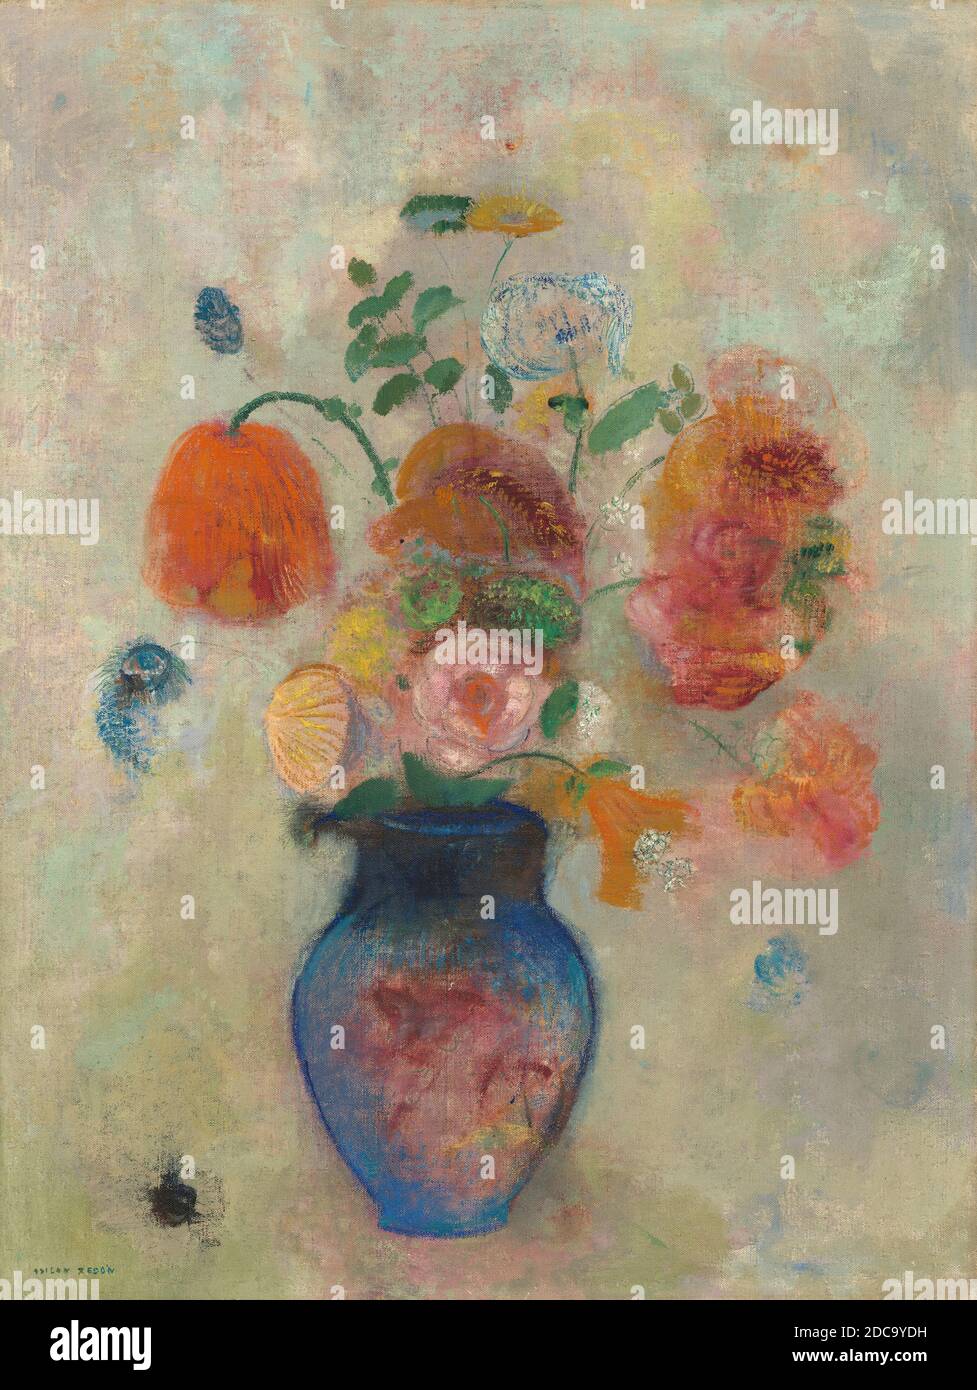 Odilon Redon, (artist), French, 1840 - 1916, Large Vase with Flowers, c. 1912, oil on canvas, overall: 73 x 54.6 cm (28 3/4 x 21 1/2 in.), framed: 98.7 x 79.7 x 6.9 cm (38 7/8 x 31 3/8 x 2 11/16 in Stock Photo